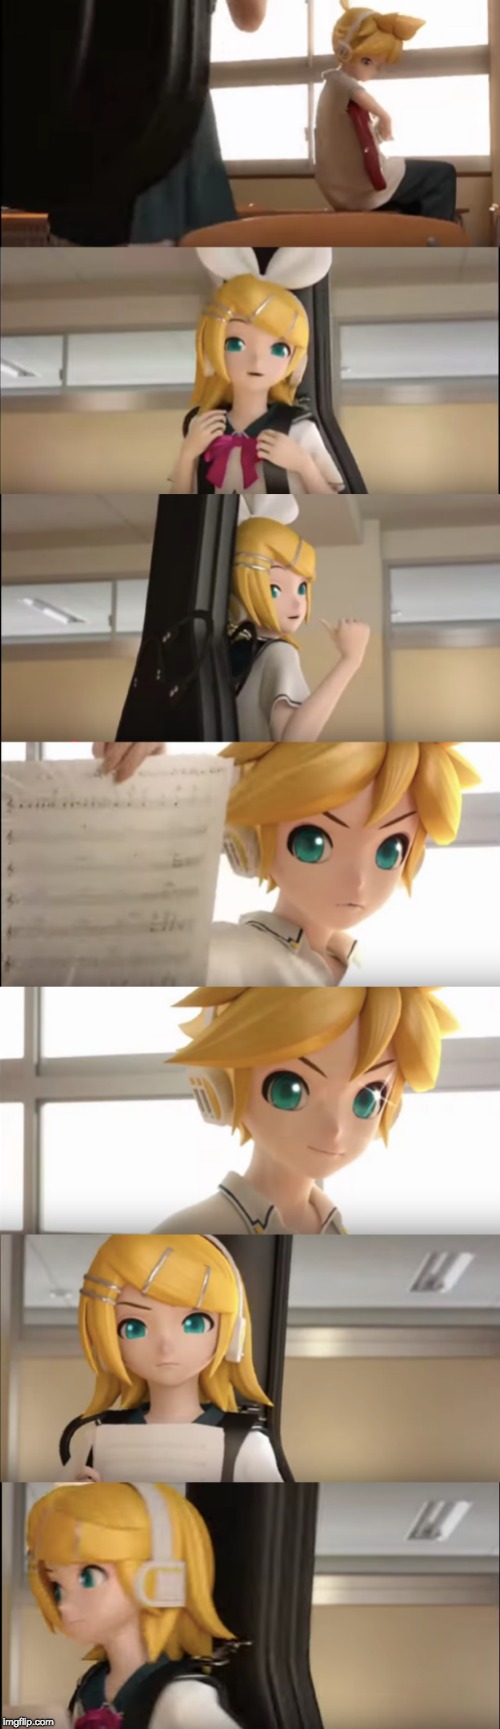 High Quality Rin and Len Kagamine Sibling Conversation Blank Meme Template